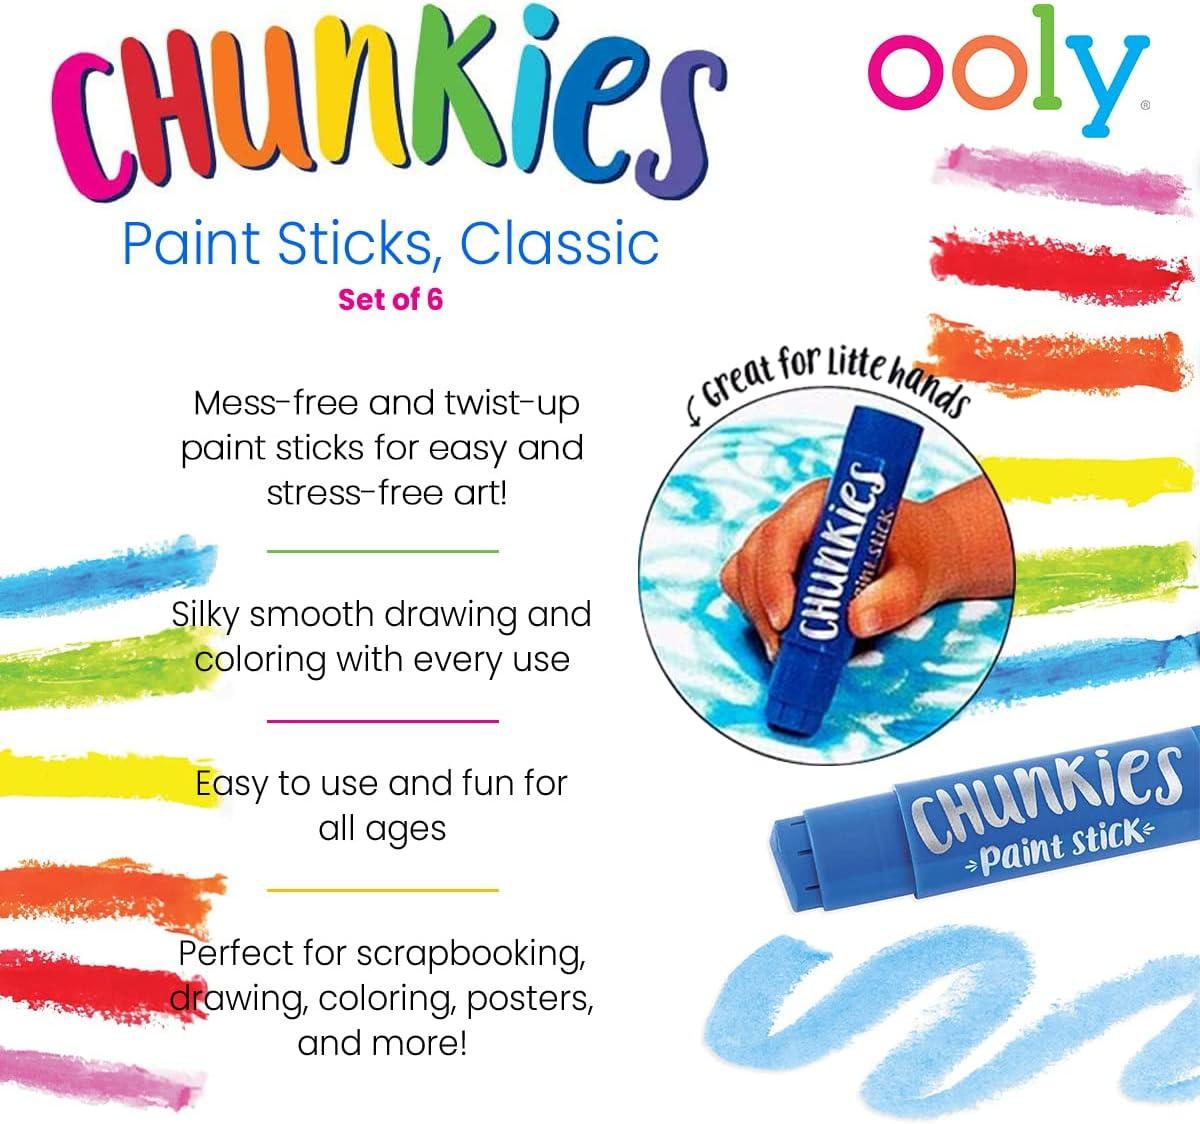 Ooly Chunkies Paint Sticks Classic 6 Pack - Set of 6 Twistable